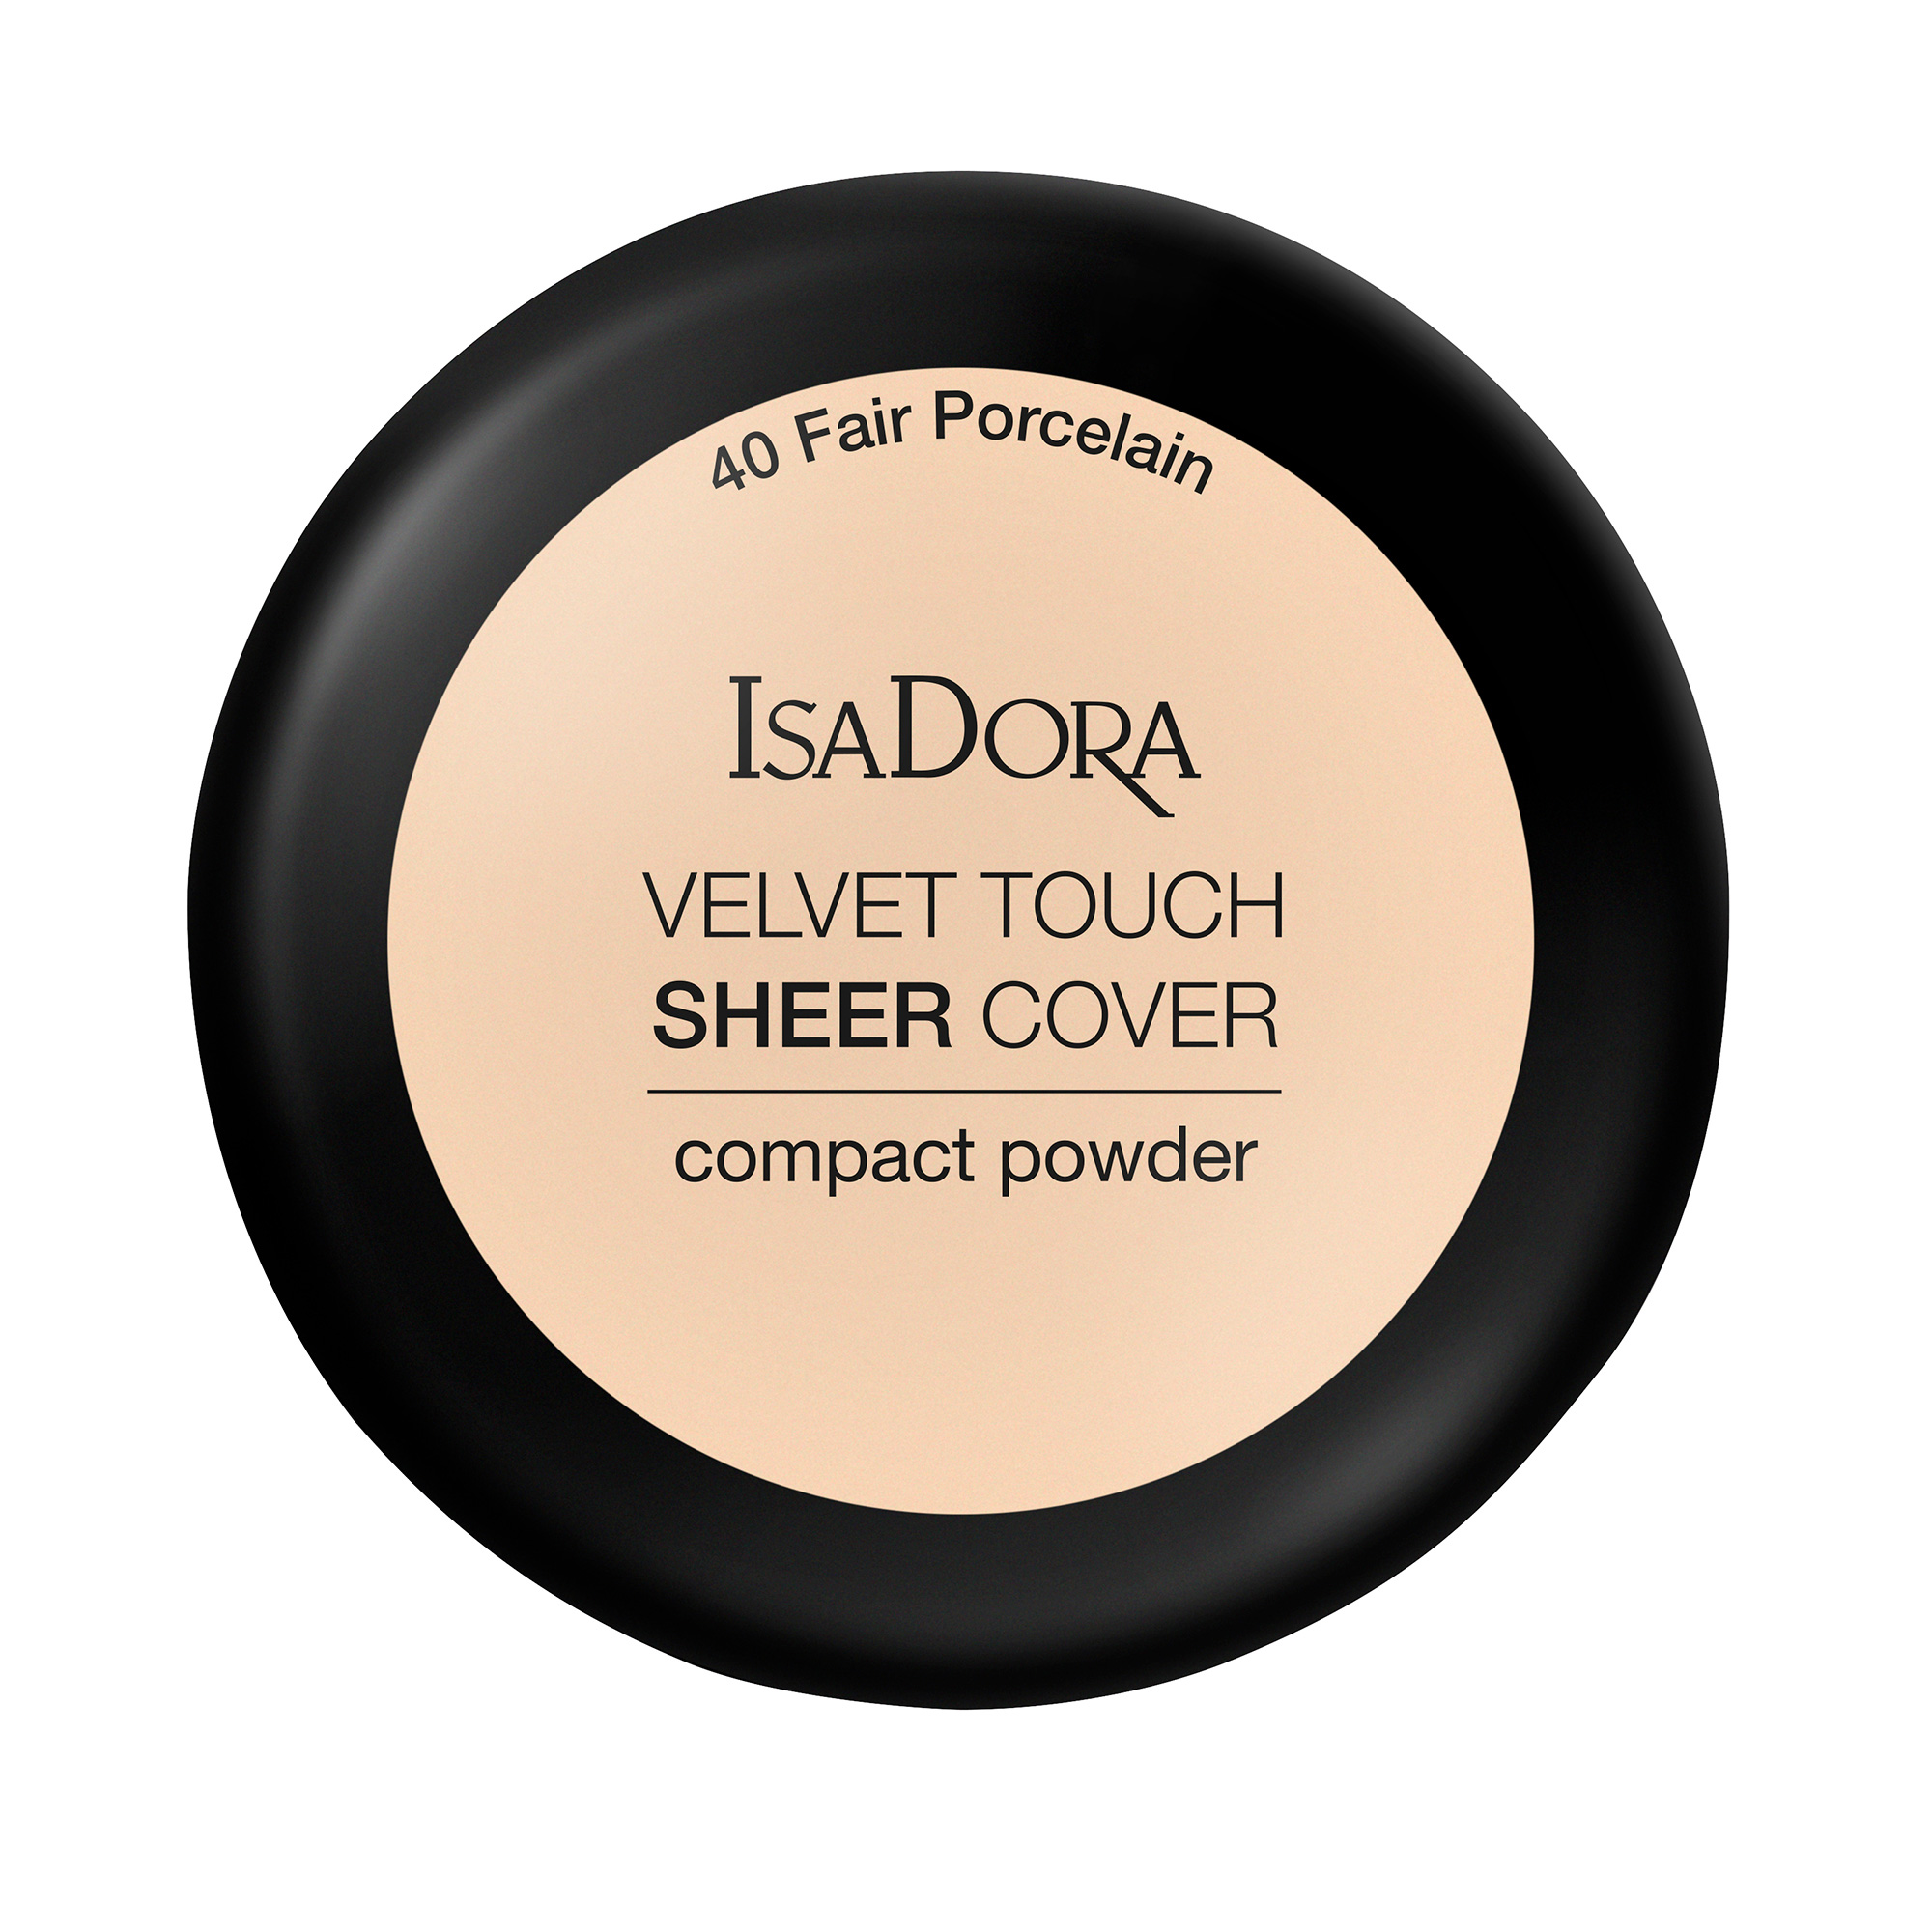 Velvet Touch Sheer Cover Compact Powder SPF20, 10 g IsaDora Puder